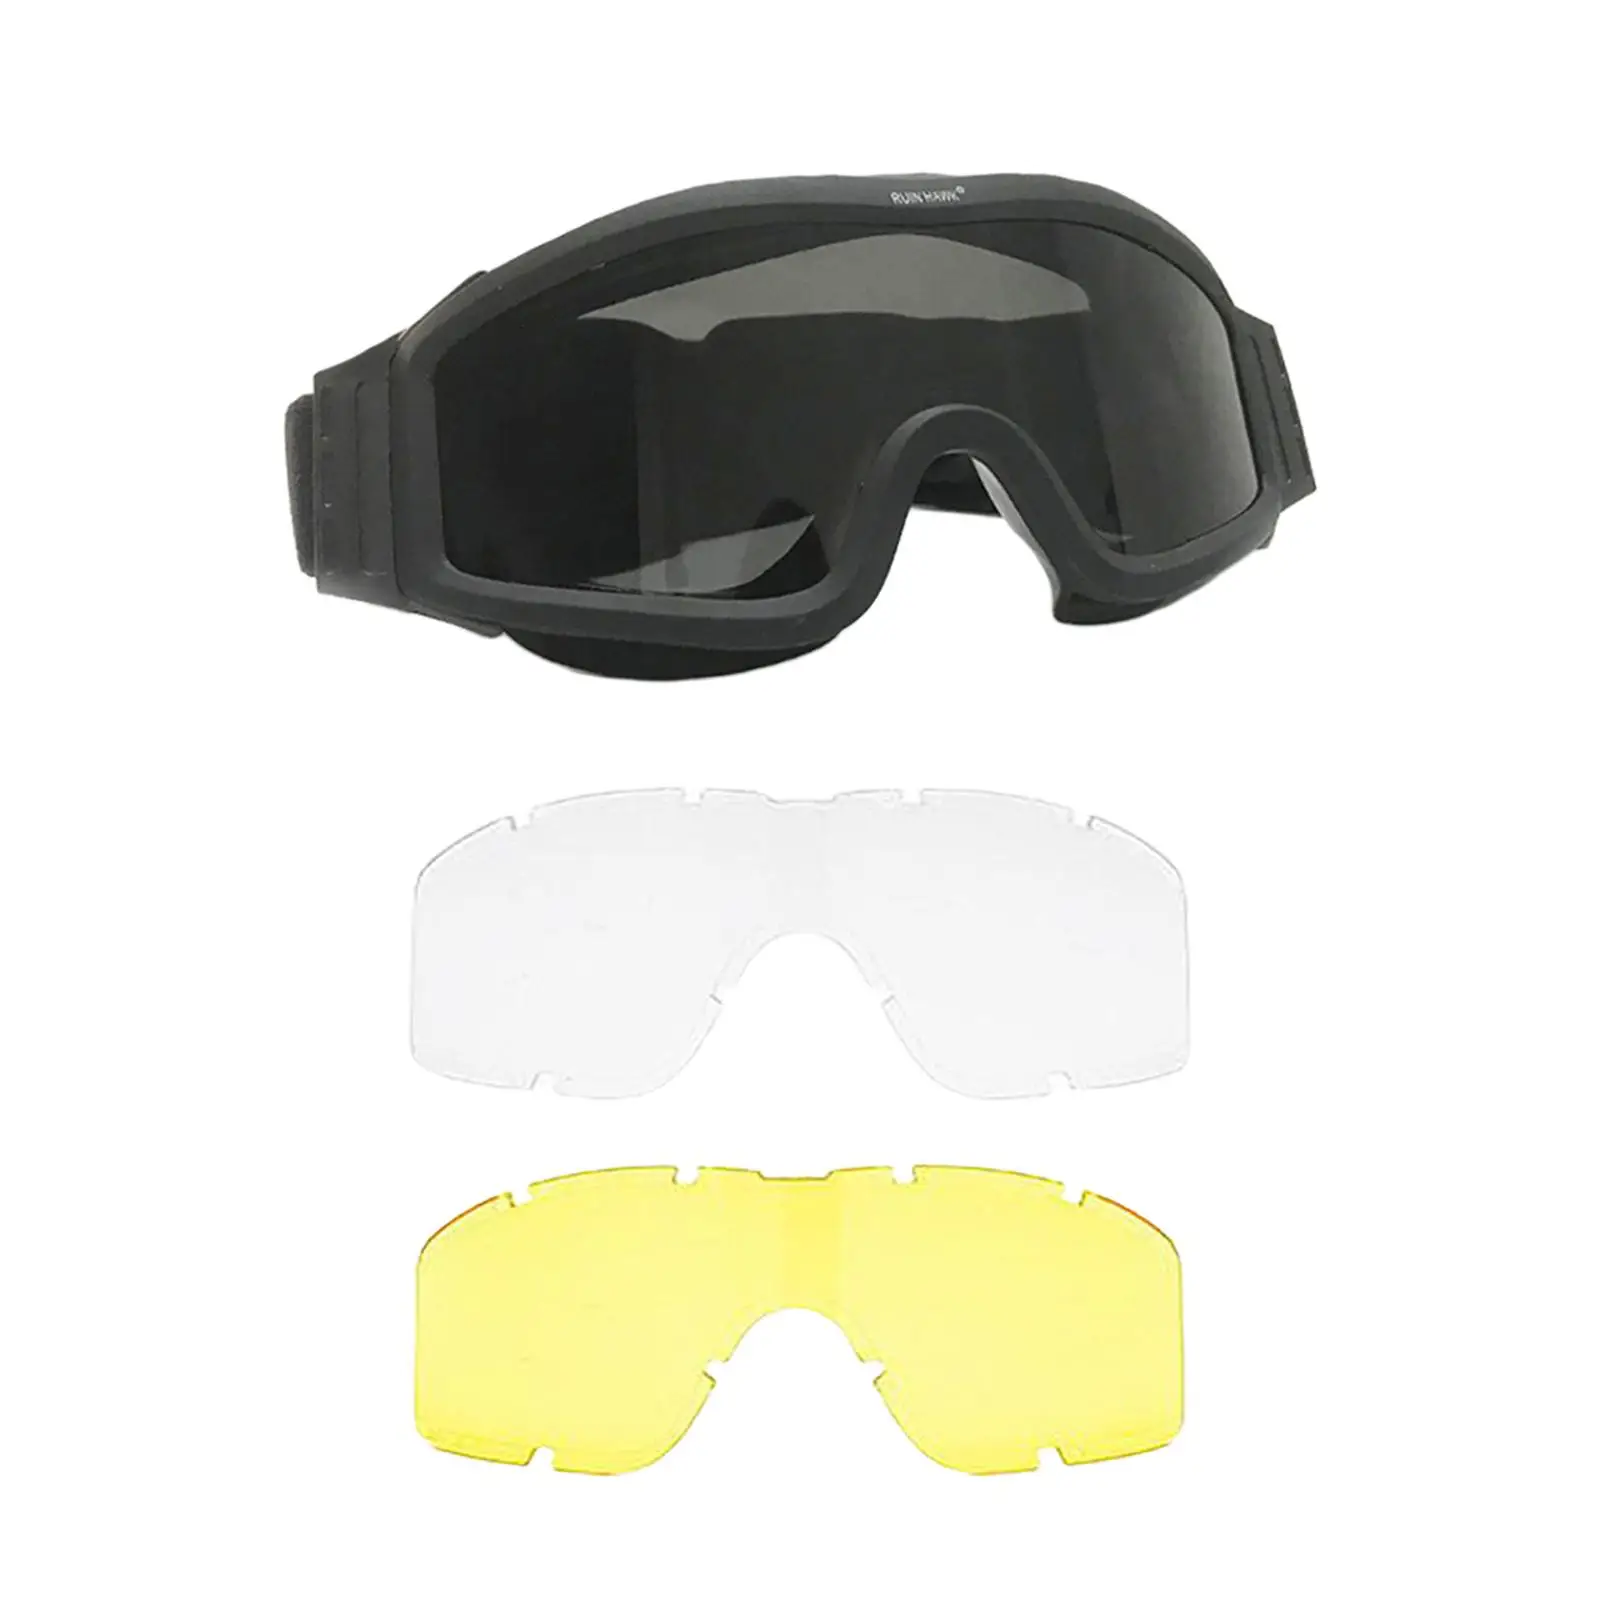 Goggles Glasses Scratch Resistant Adjustable Dustproof for Cycling Locust Combat